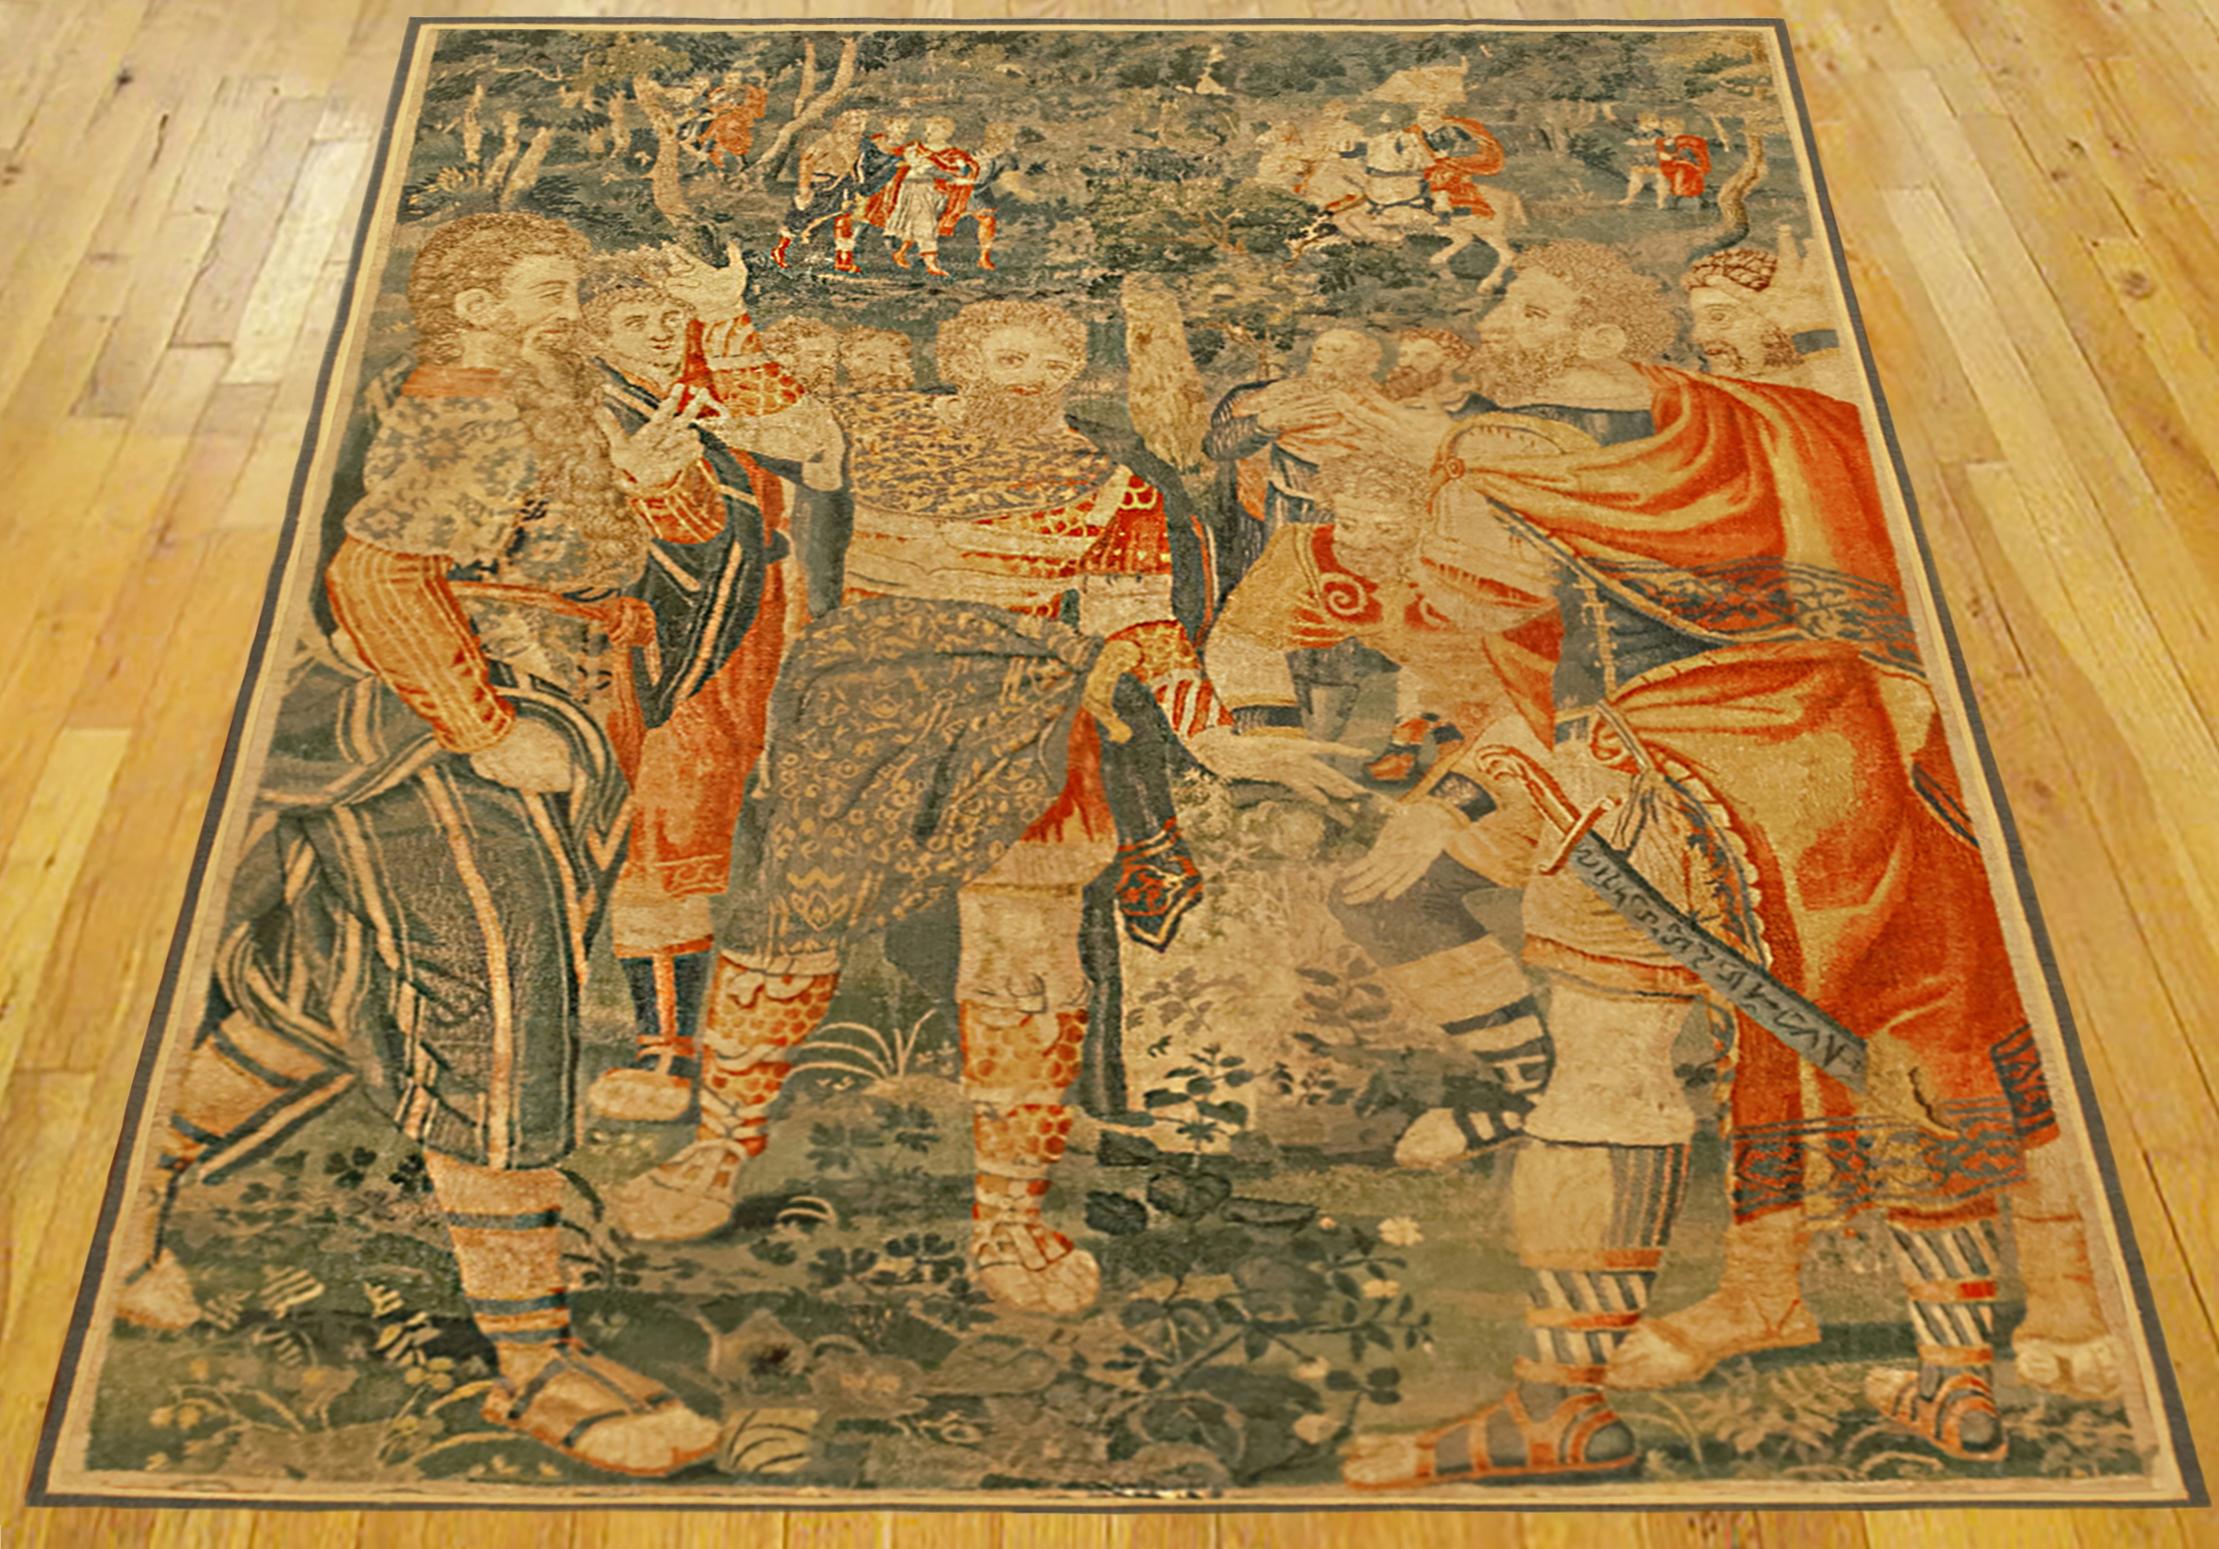 A Brussels historical tapestry from the late 16th century, featuring several armed figures in the foreground about to engage in battle, as other figures on horseback draw closer from the distance; within a wooded forest setting. Wool with silk